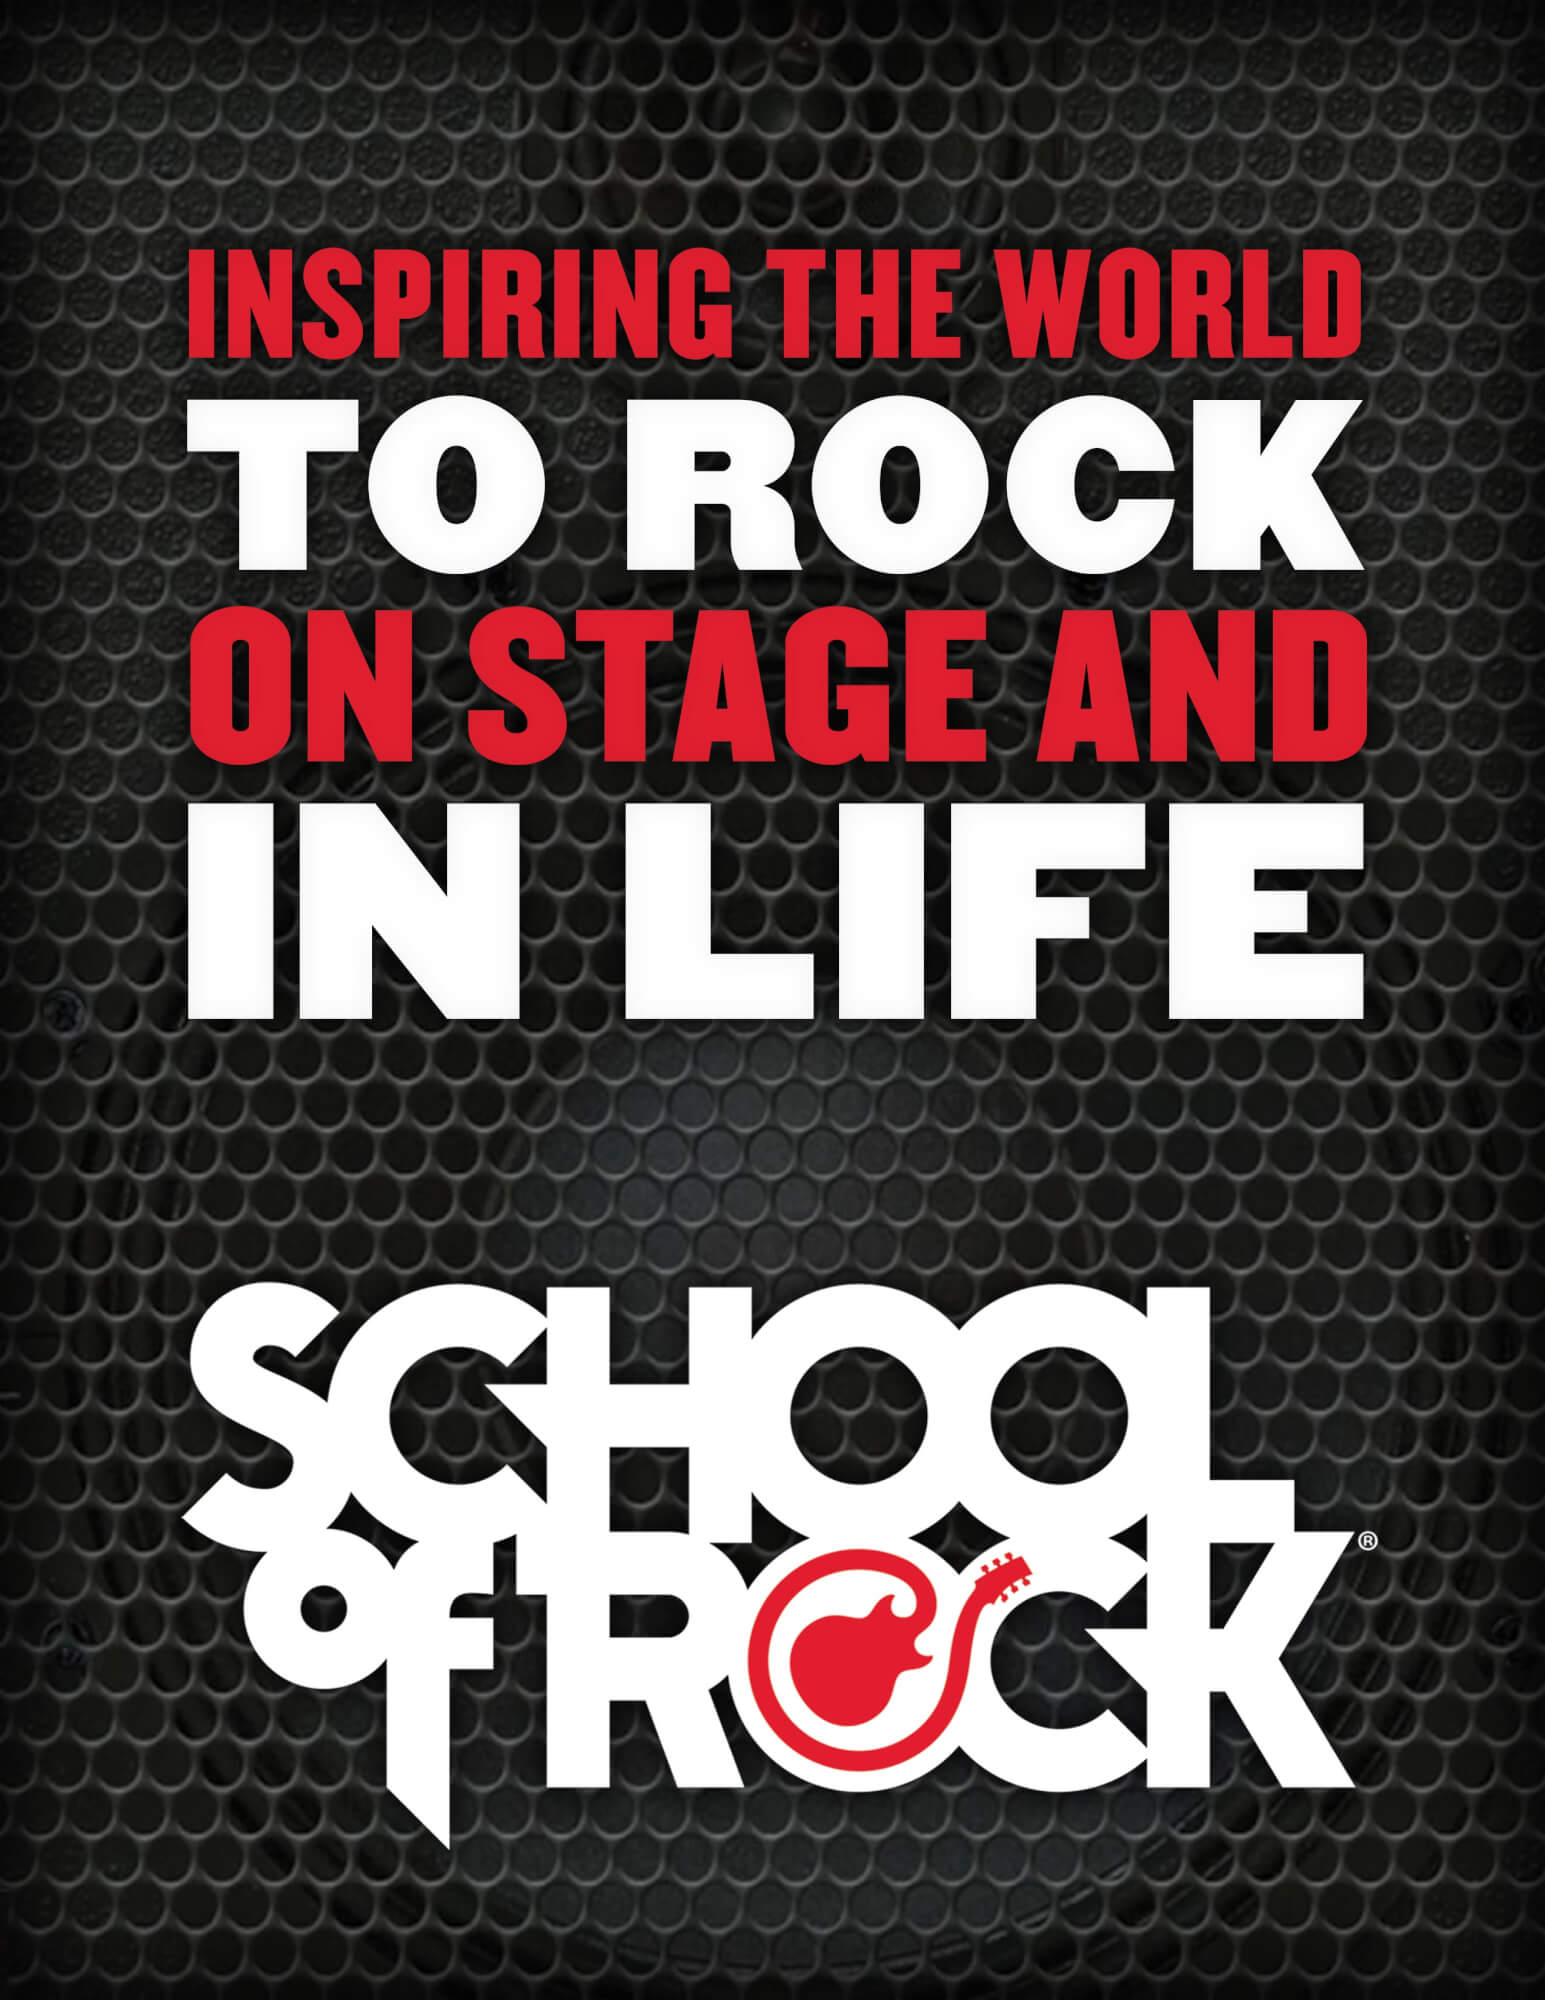 Inspiring the World to Rock on Stage and in Life!